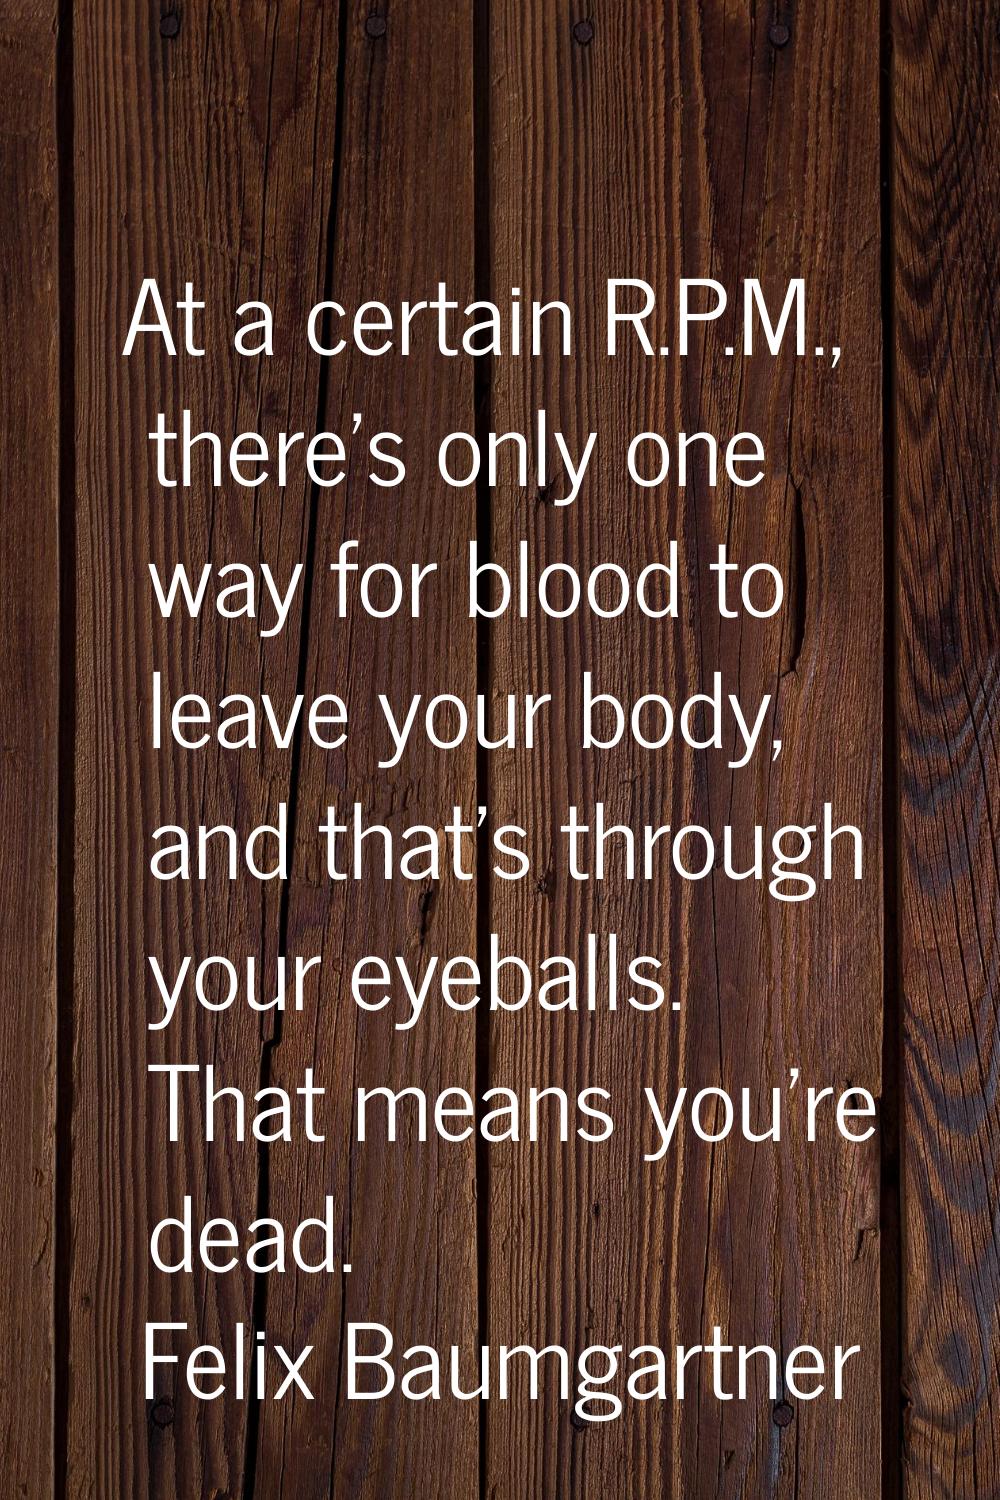 At a certain R.P.M., there's only one way for blood to leave your body, and that's through your eye